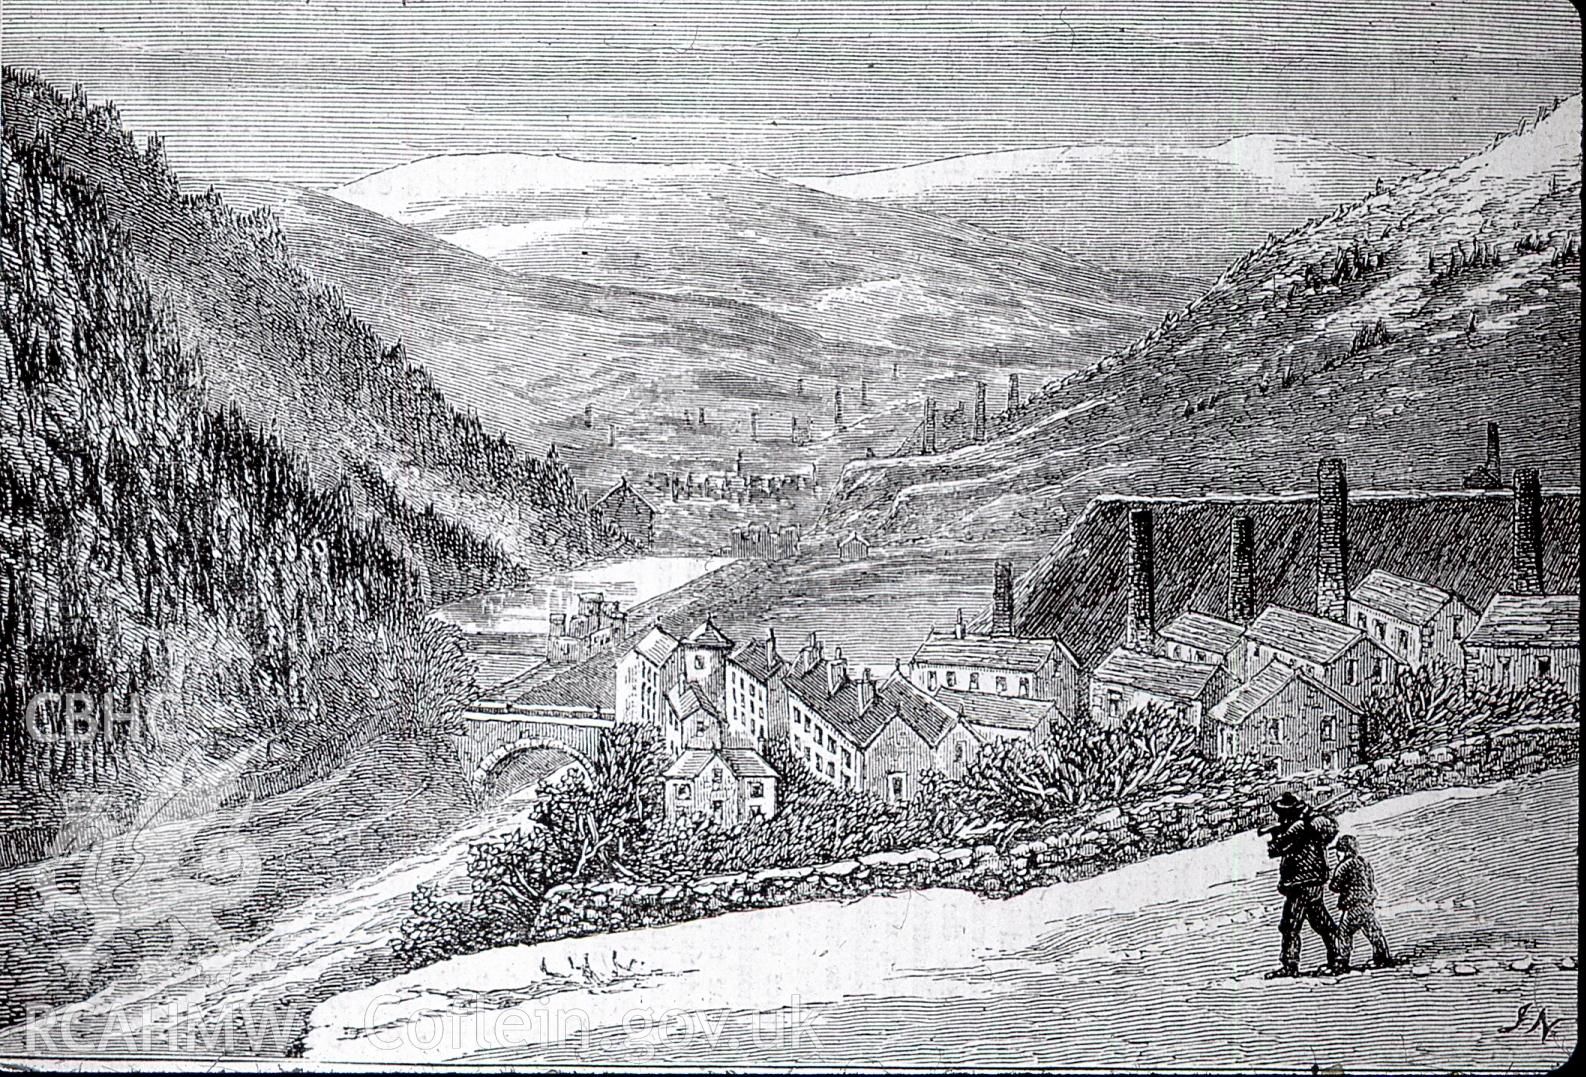 Digital copy of etching from London Illustrated News entitled: 'View of Merthyr and the Village of Cefn', undated.